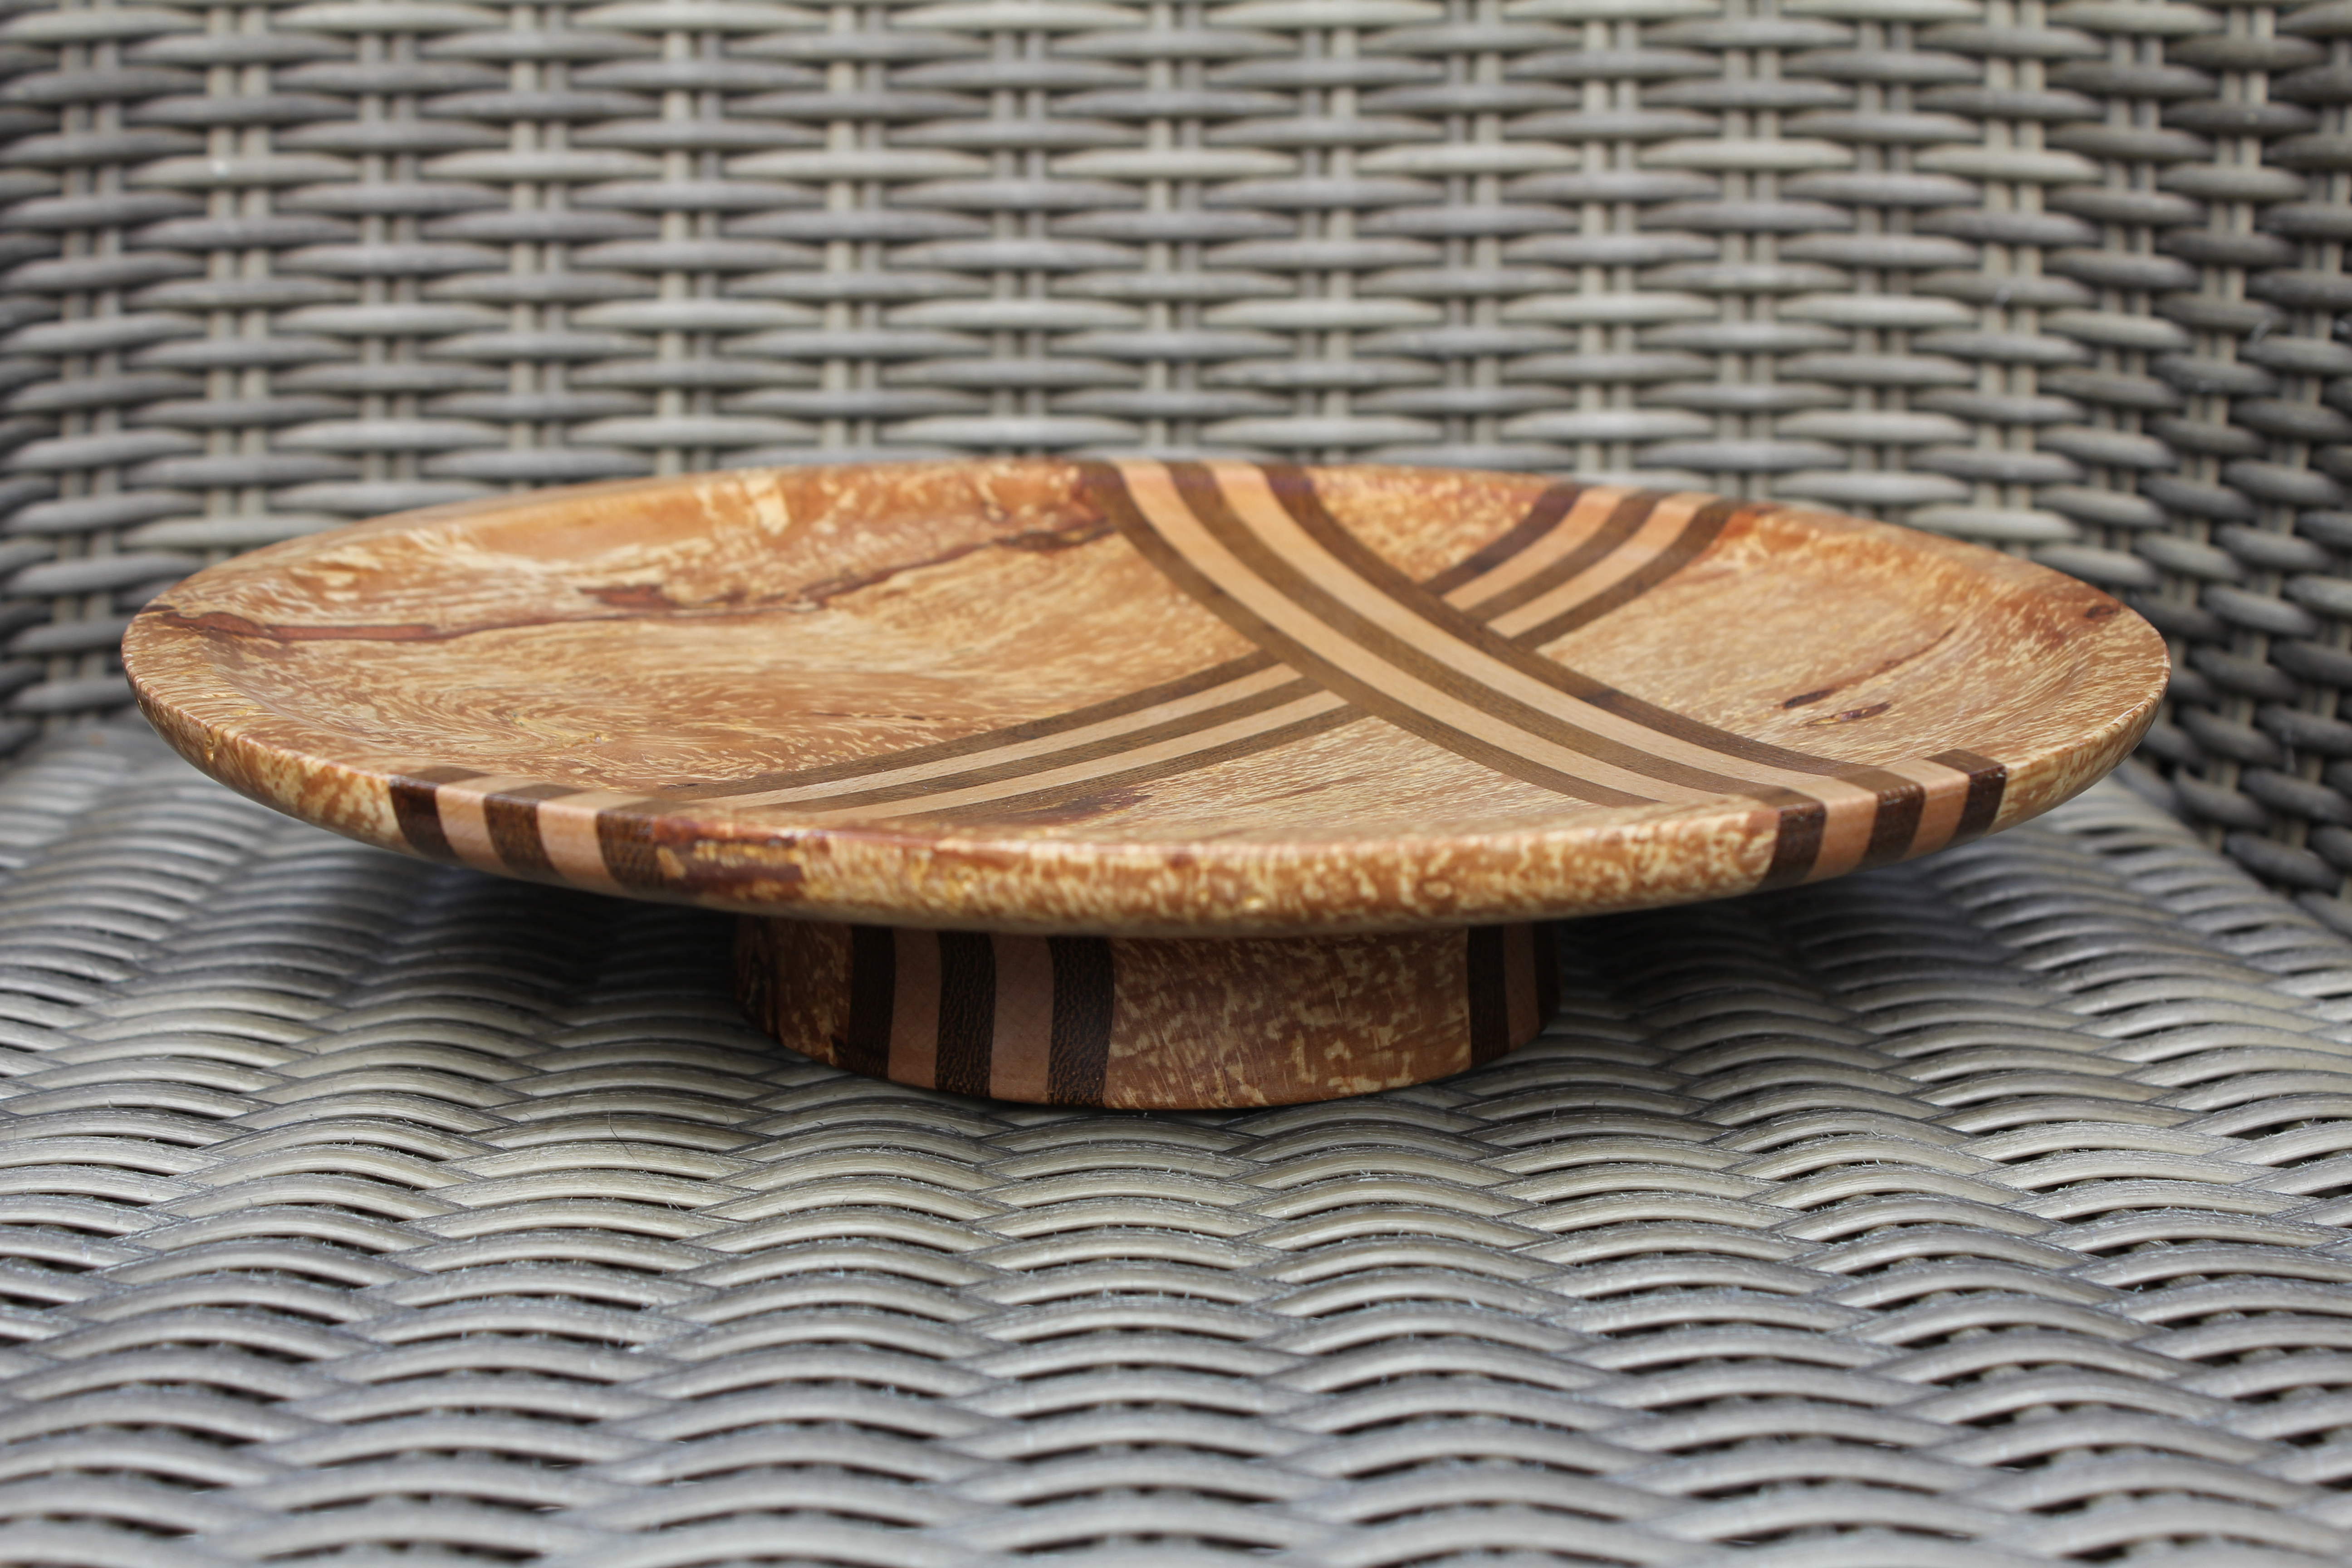 Spalted Beech turned with inserts of Beech and dark wood.  Dia approx' 30cm